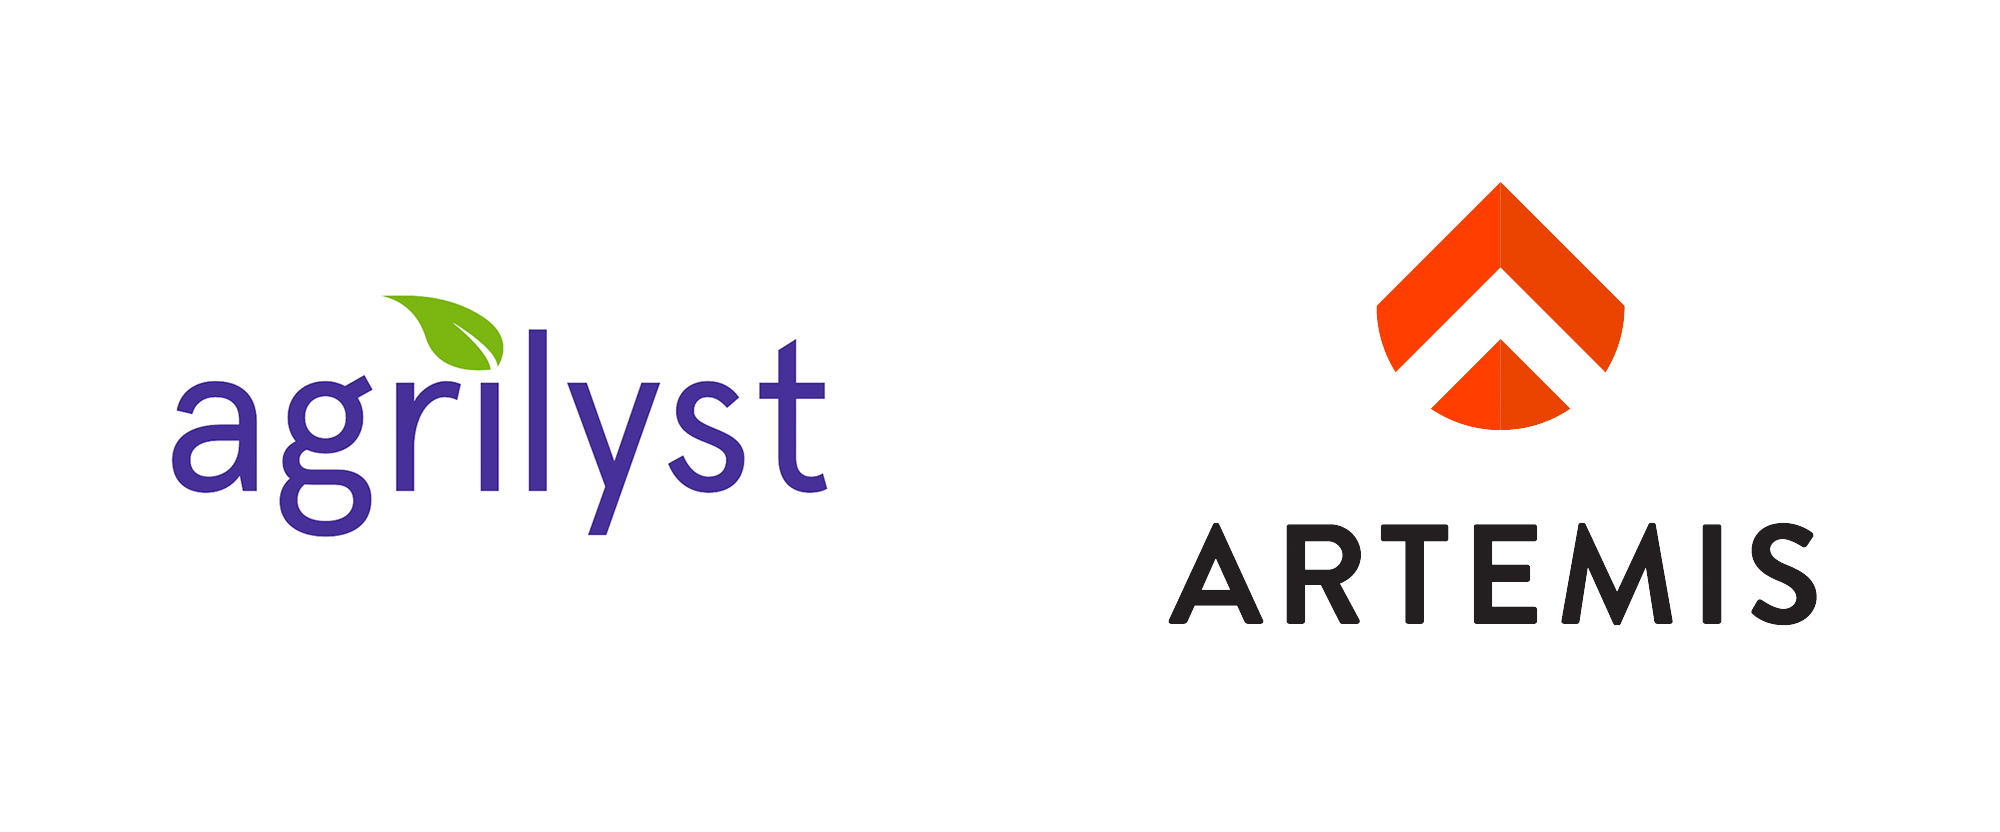 New Name and Logo for Artemis